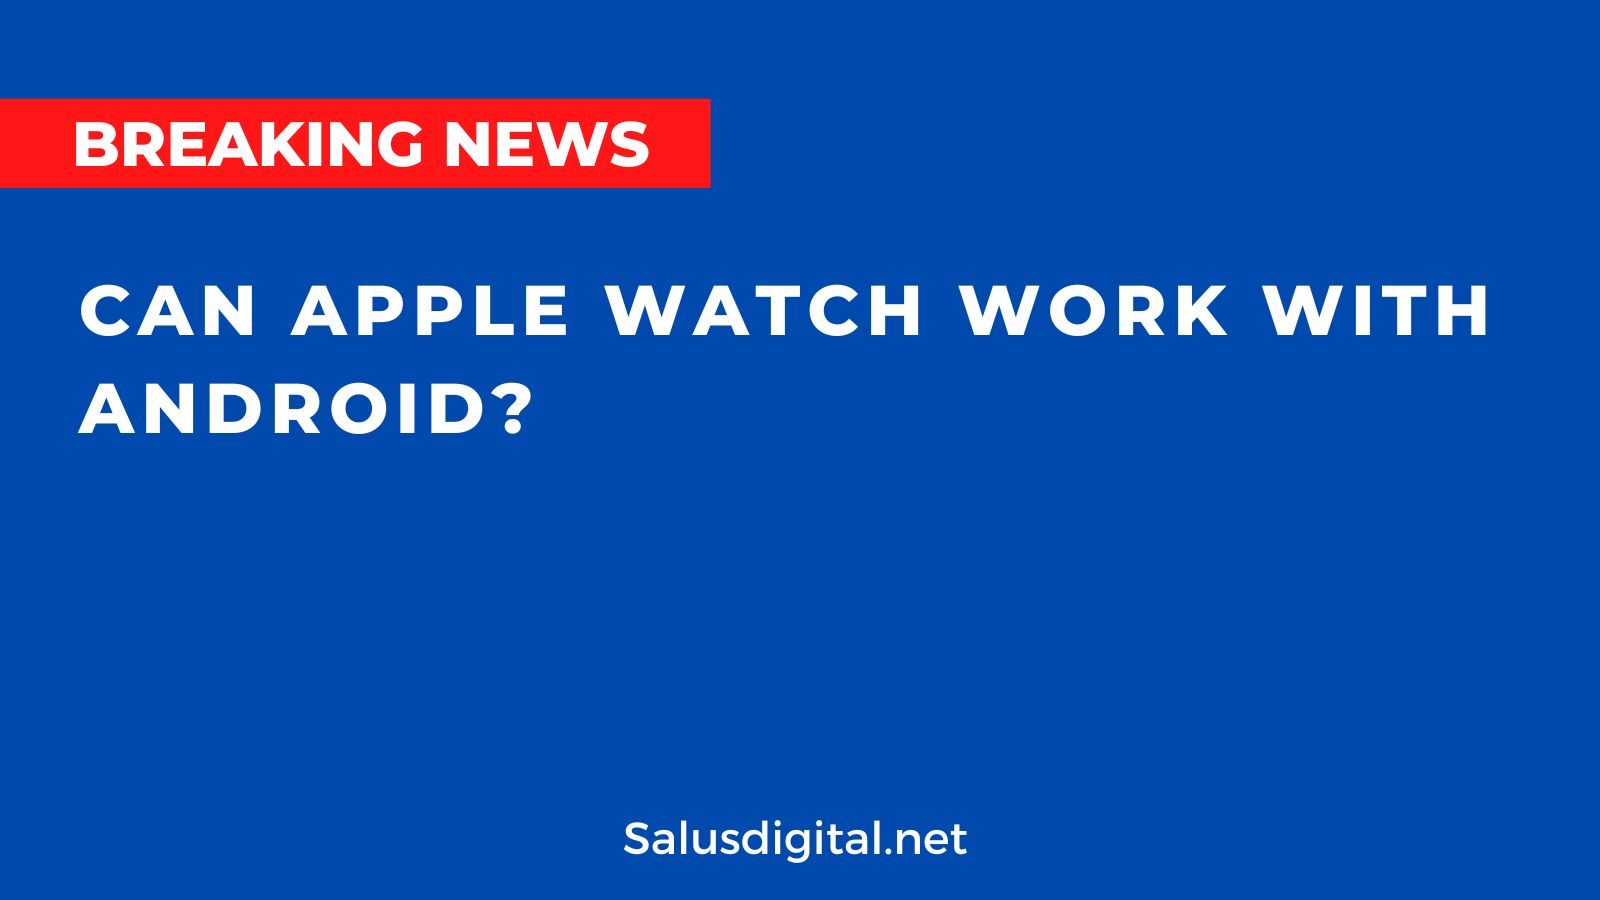 Can Apple Watch Work with Android?